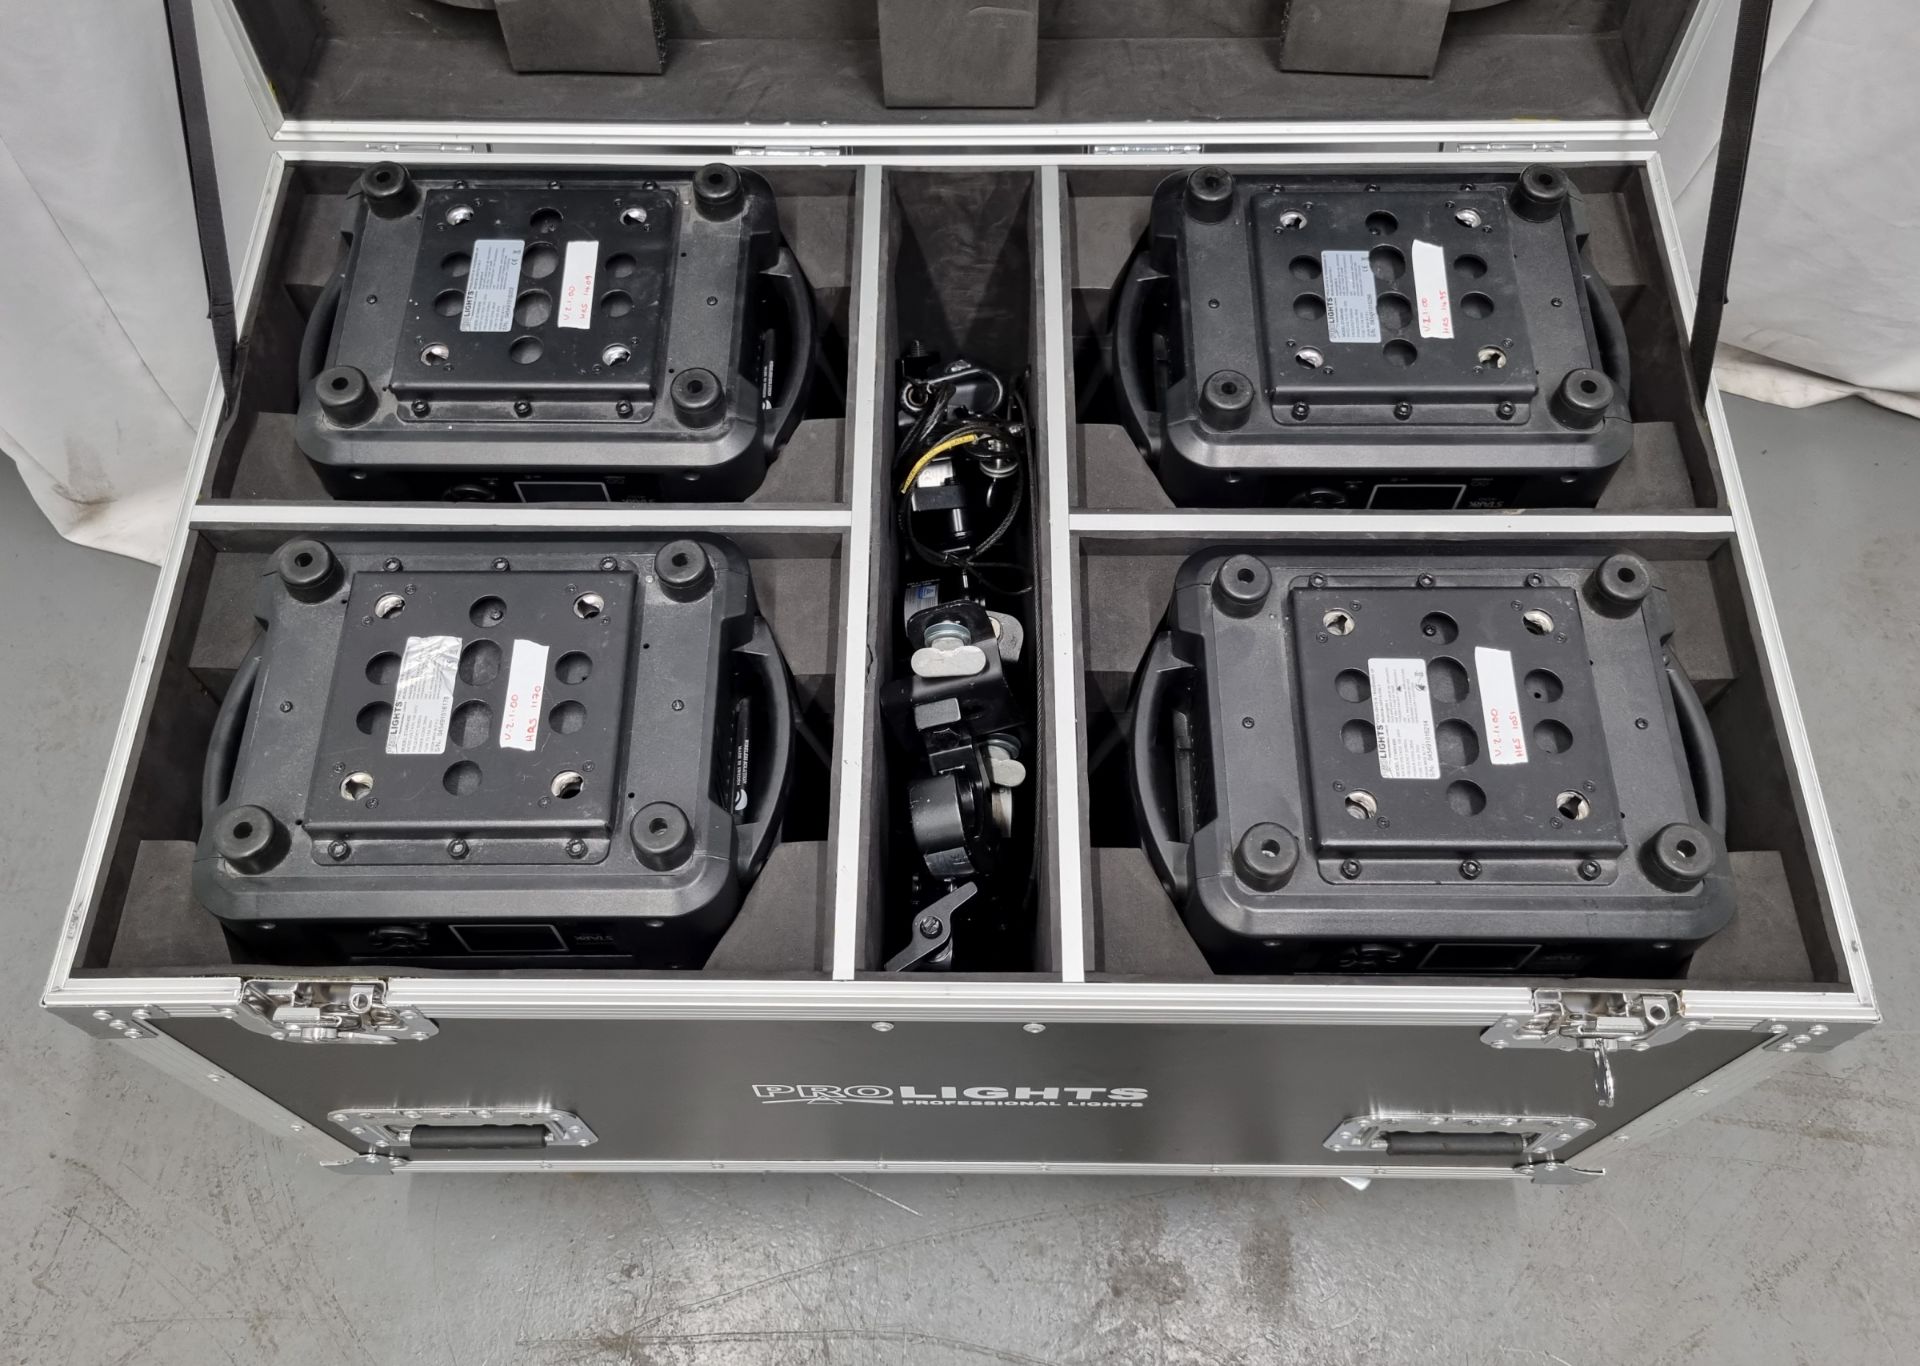 4x Prolights Stark 400 with flightcase, hanging brackets and safety bonds. S/N:045491016266 - Image 8 of 13